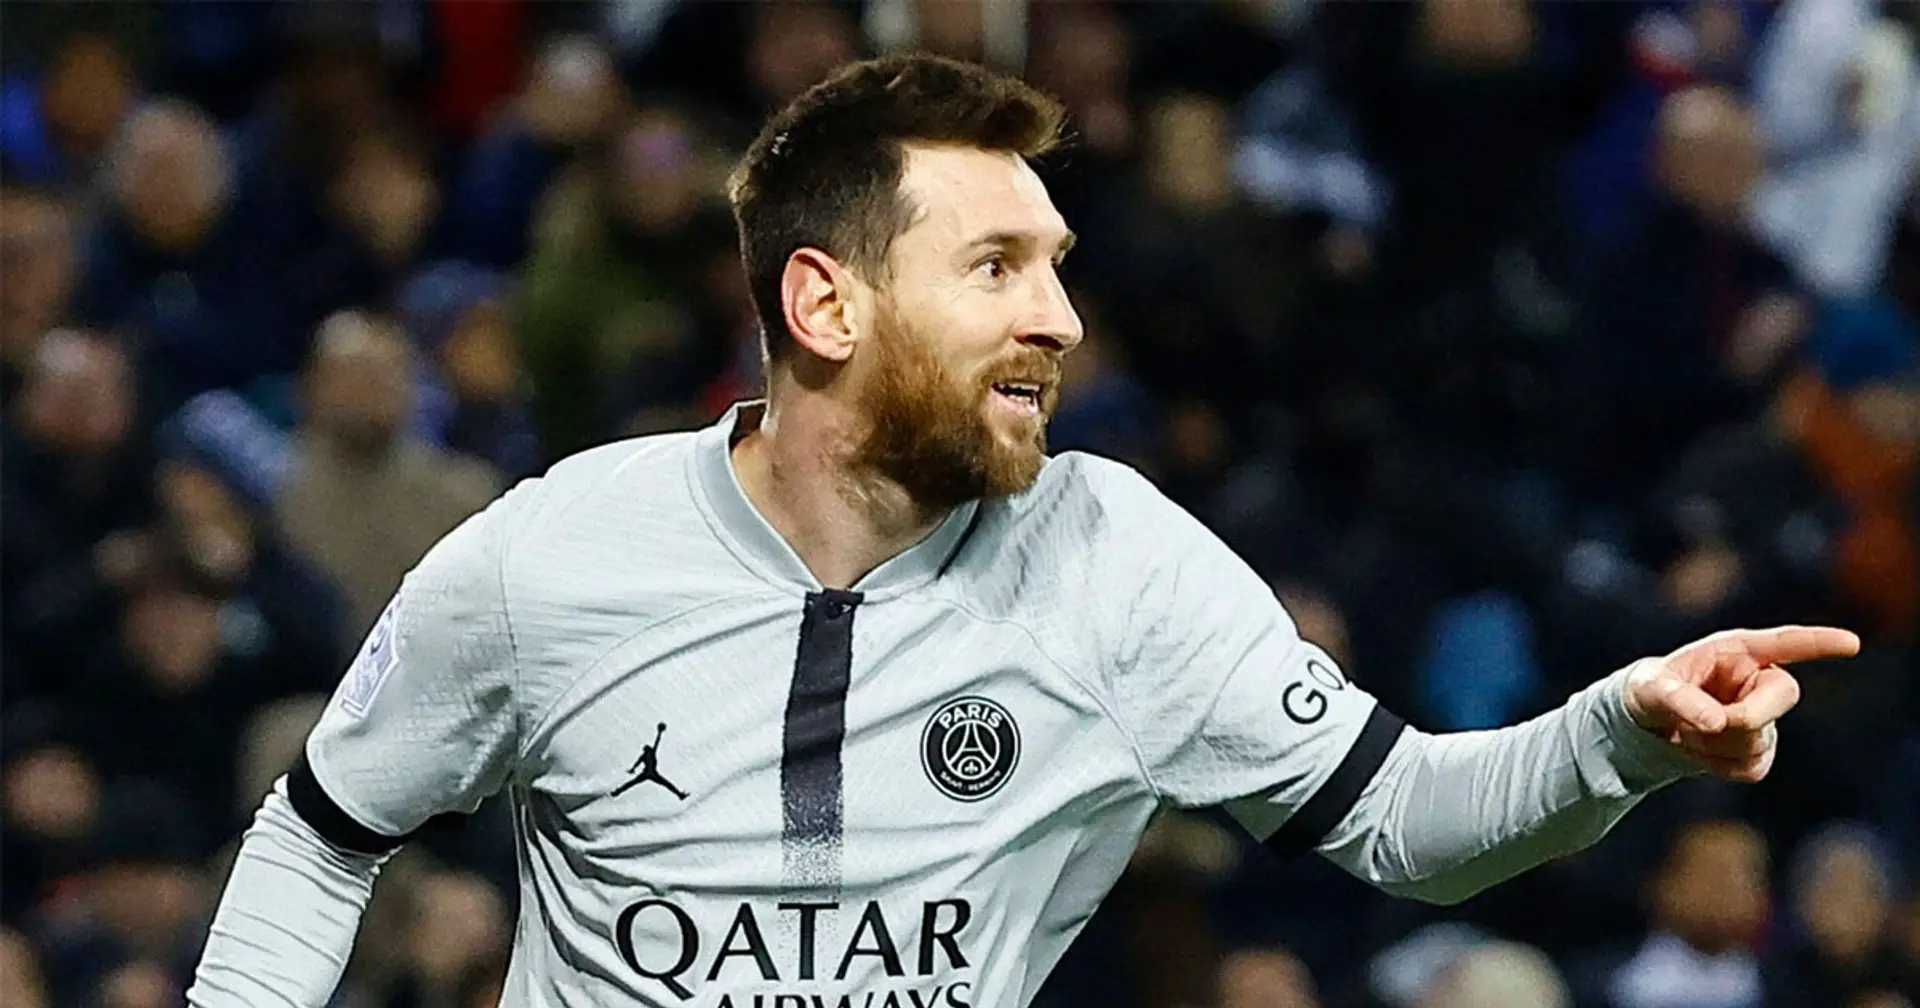 Messi reaches 1,000 goal contributions at club level